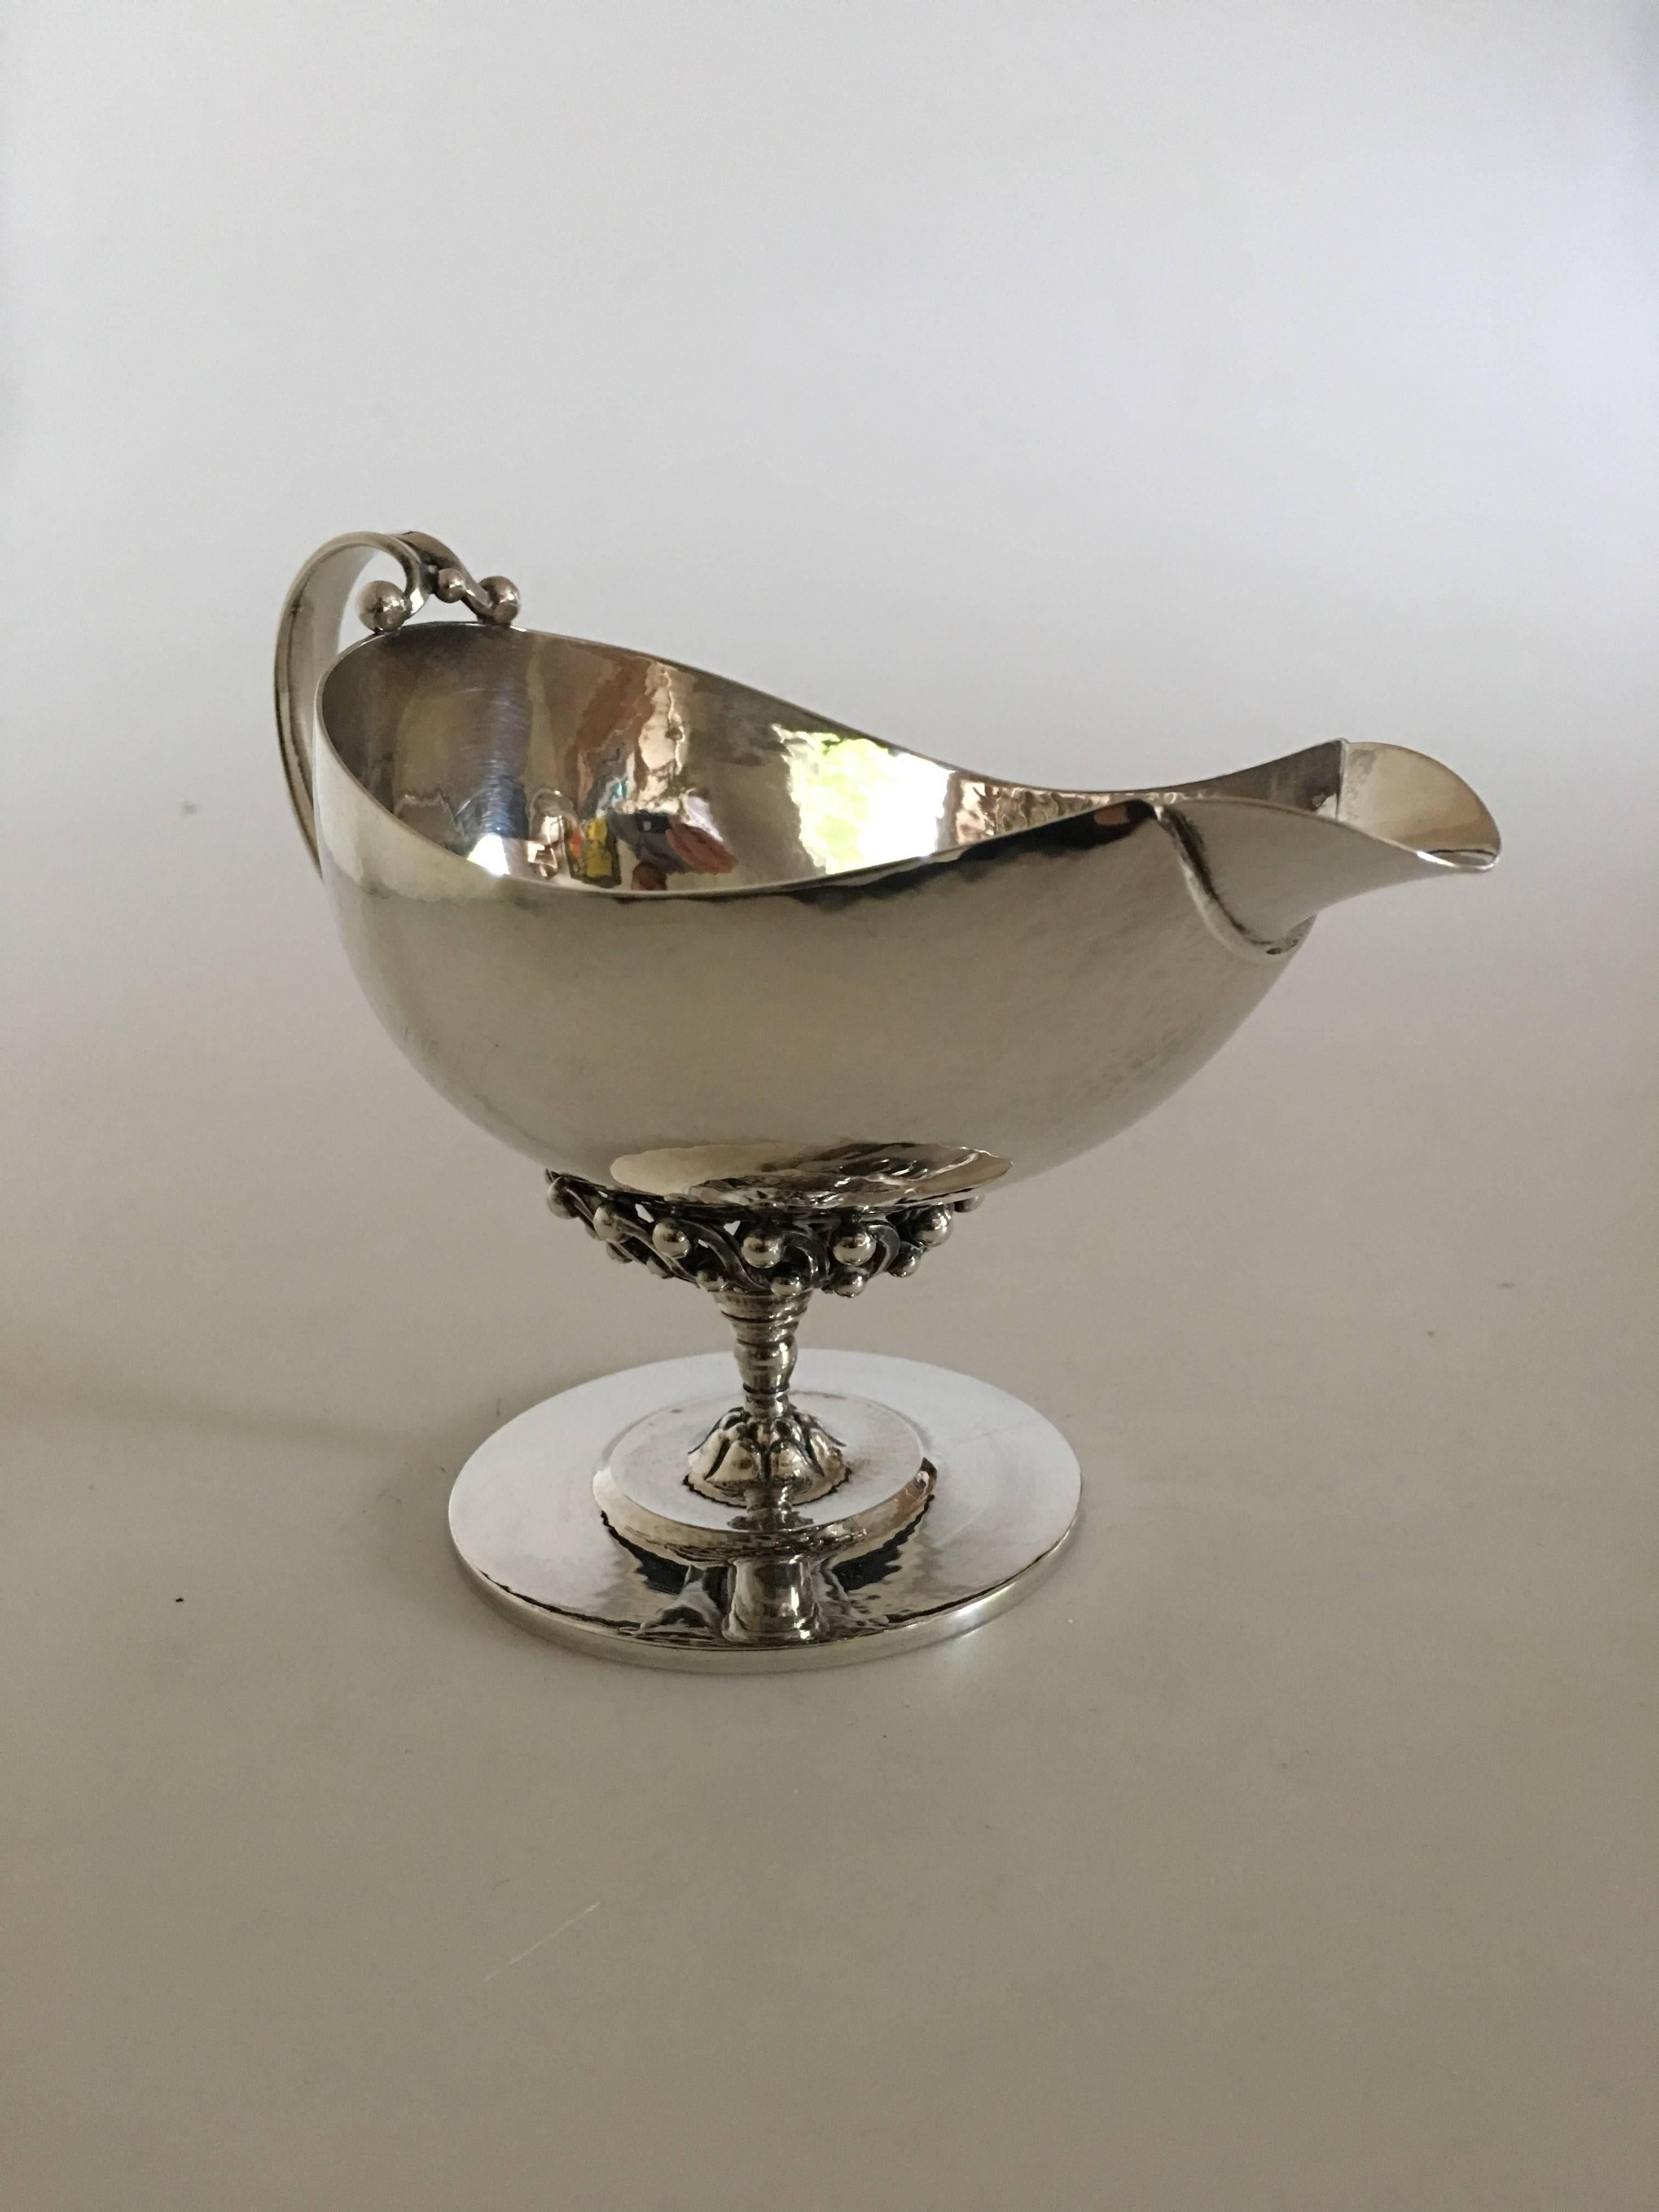 Georg Jensen sterling silver sauceboat no. 43 designed by Johan Rohde. Measure: 11.5 cm H, 16 x 8 cm. weighs 254 grams (8.90 oz). Manufactured after 1945. In great condition.